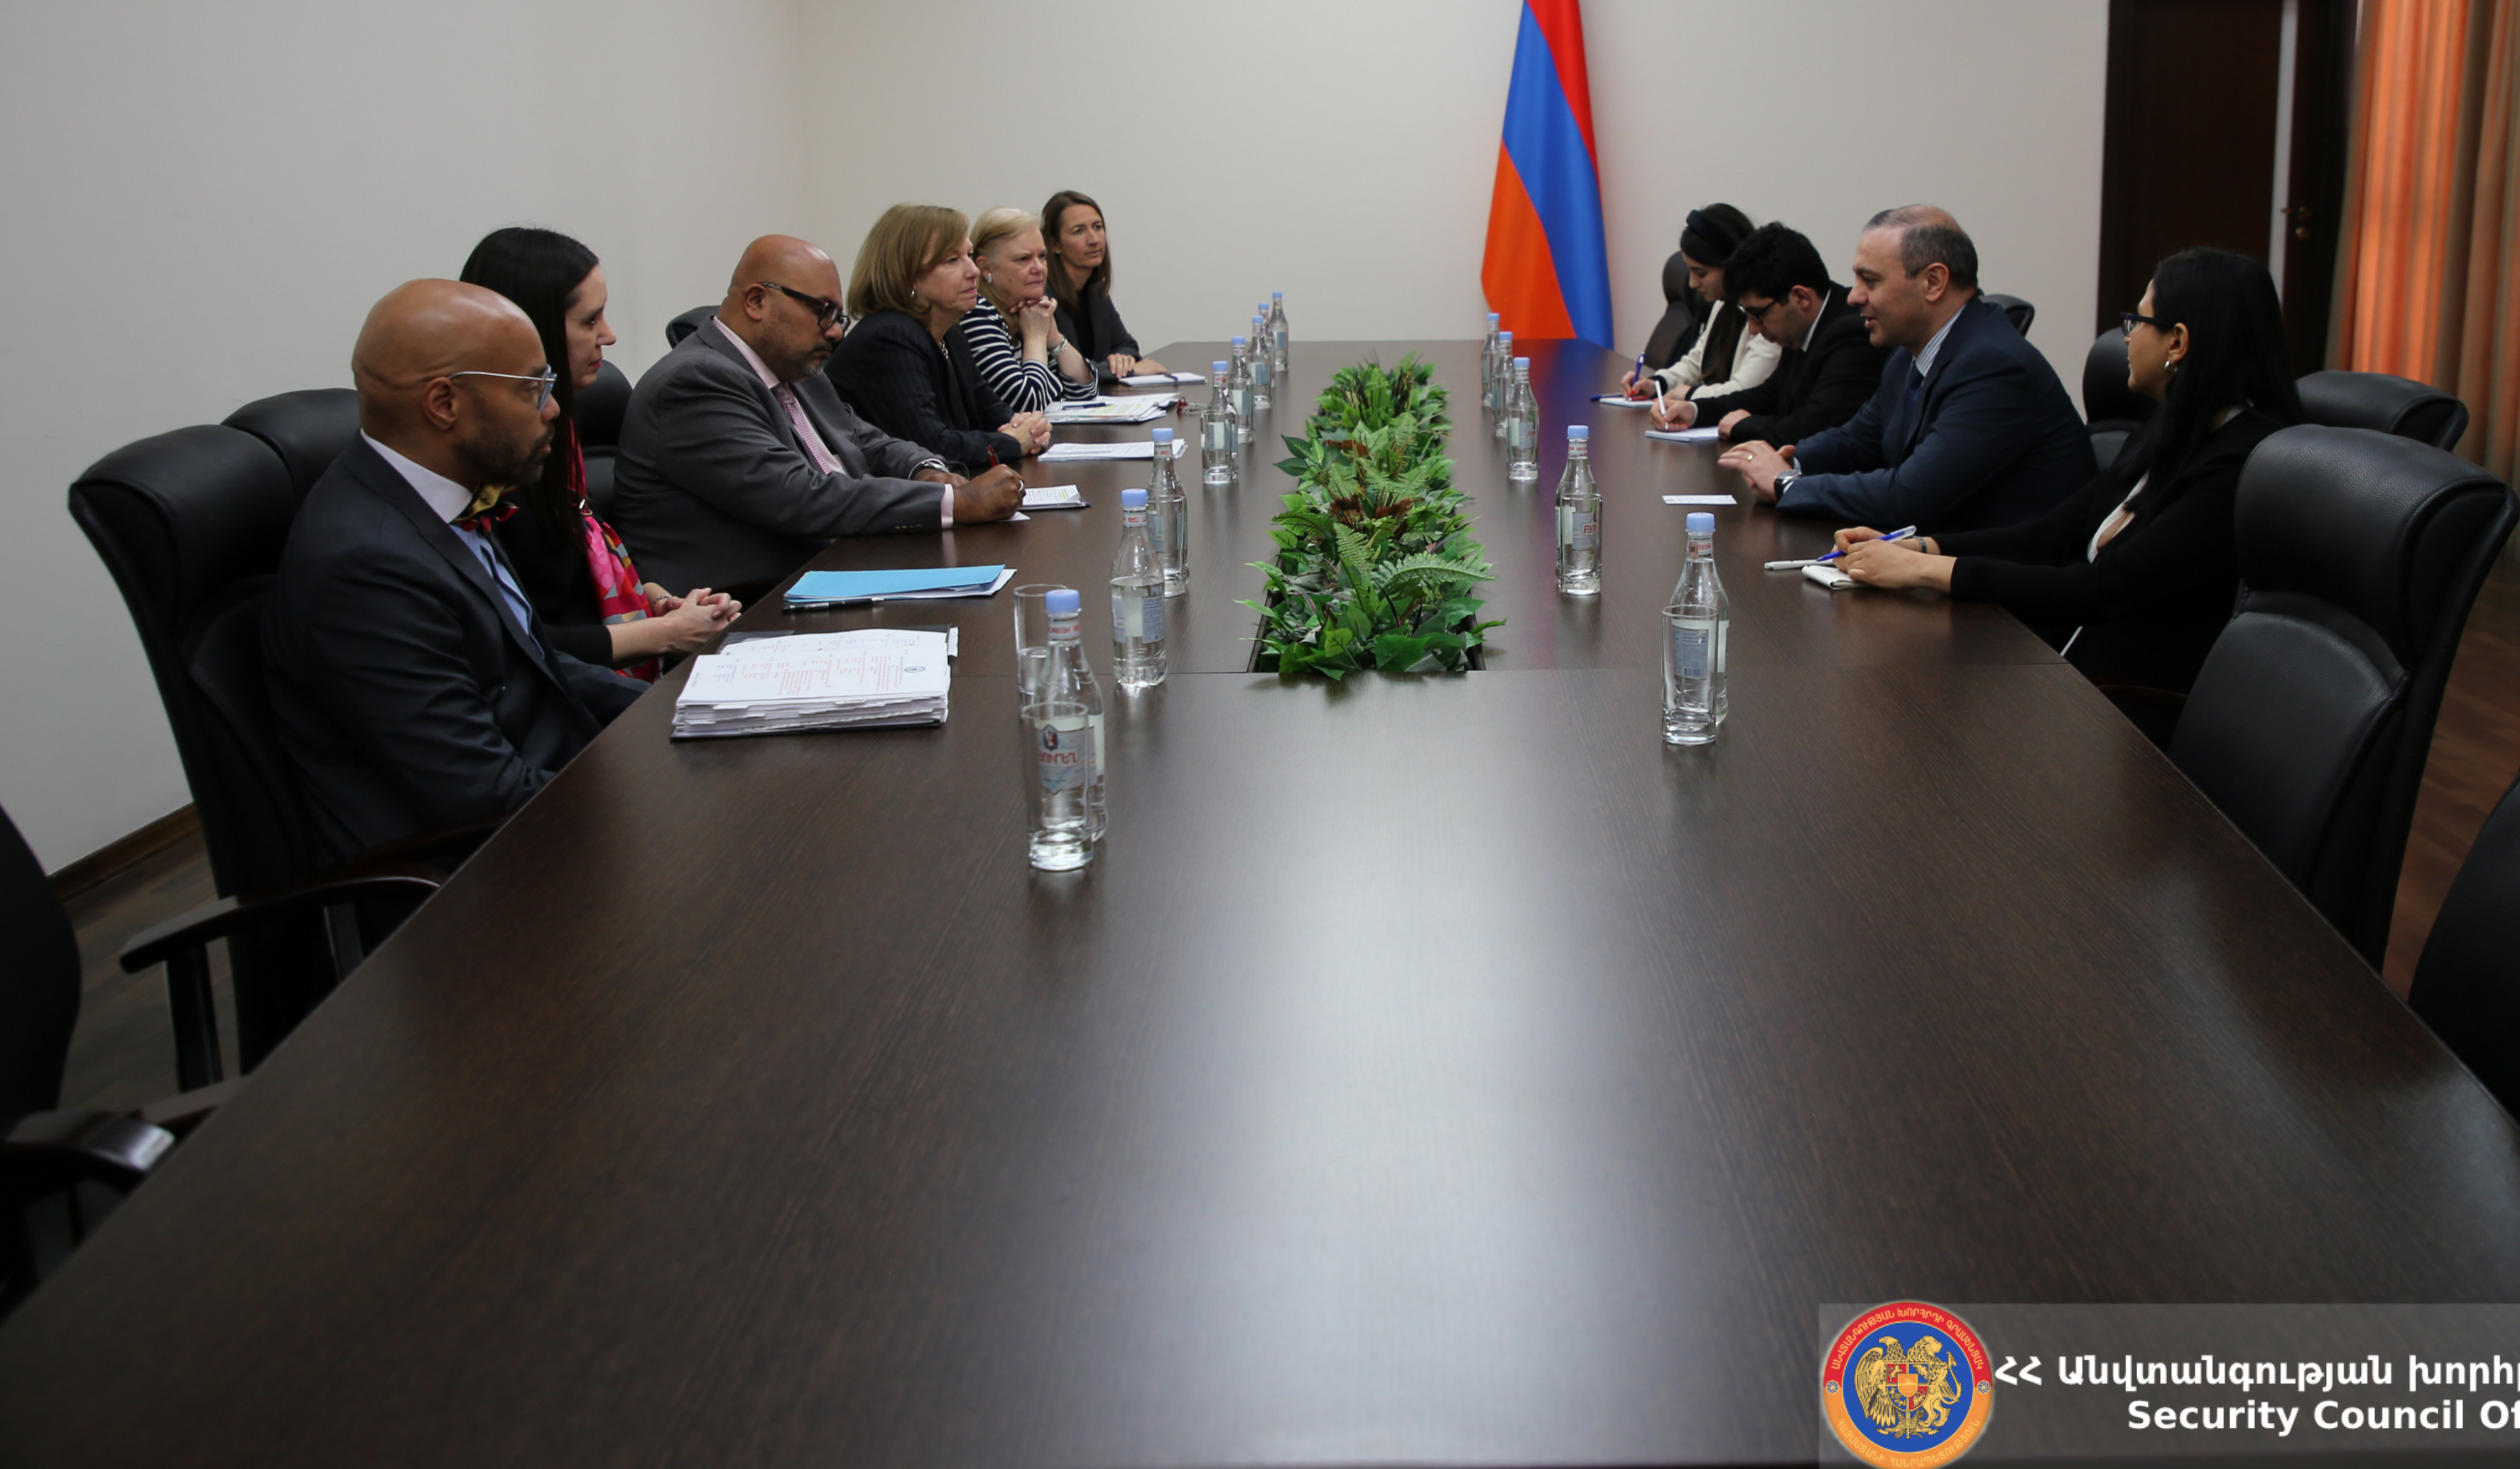 Armen Grigoryan and Deputy Secretary of US Department of Commerce discussed prospects of Armenian-American investments